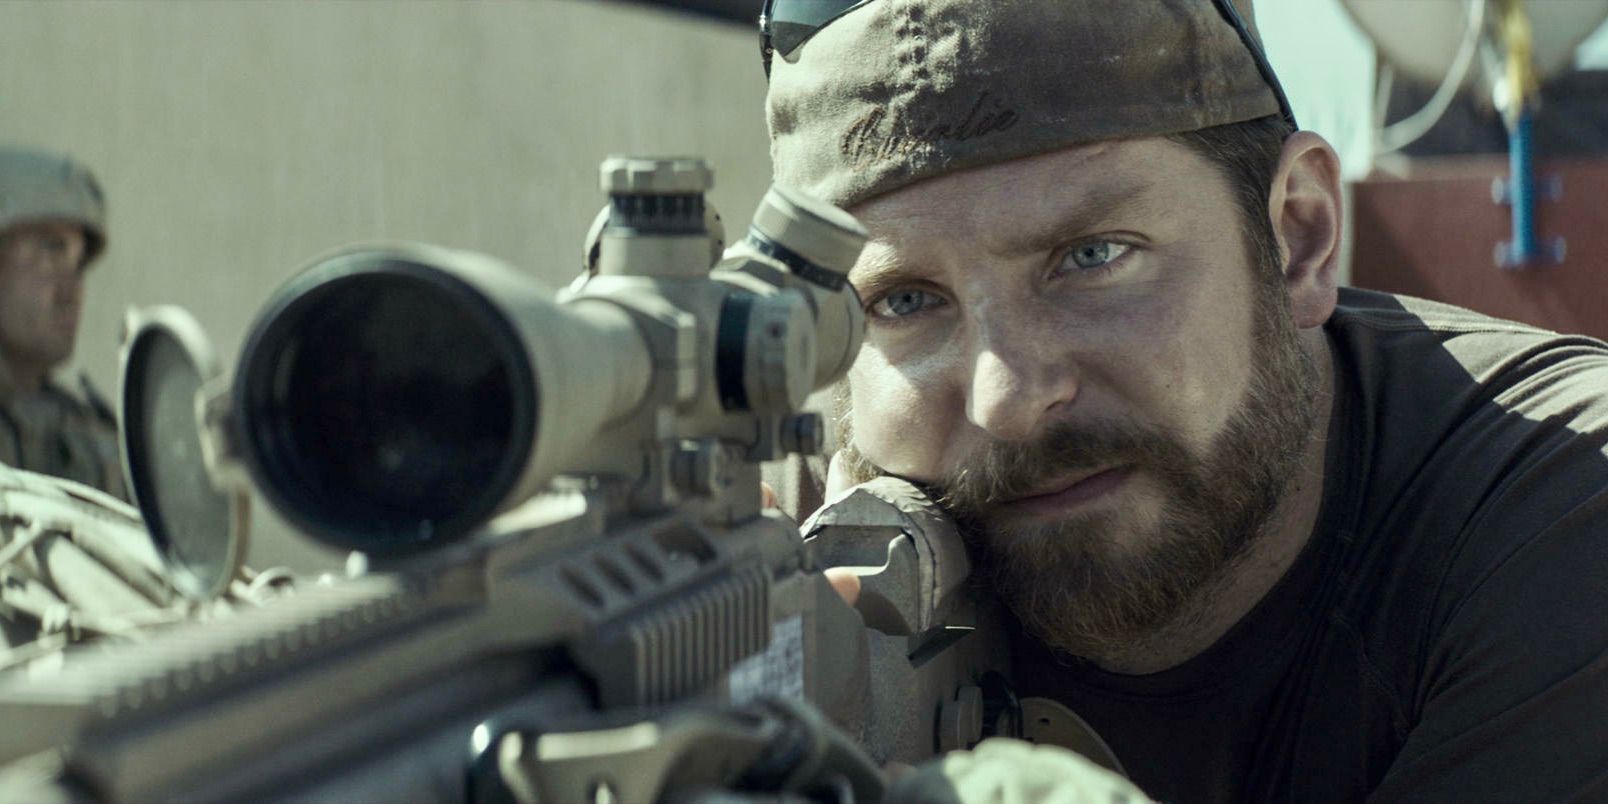 Bradley Cooper as Chris Kyle aiming a sniper rifle in American Sniper